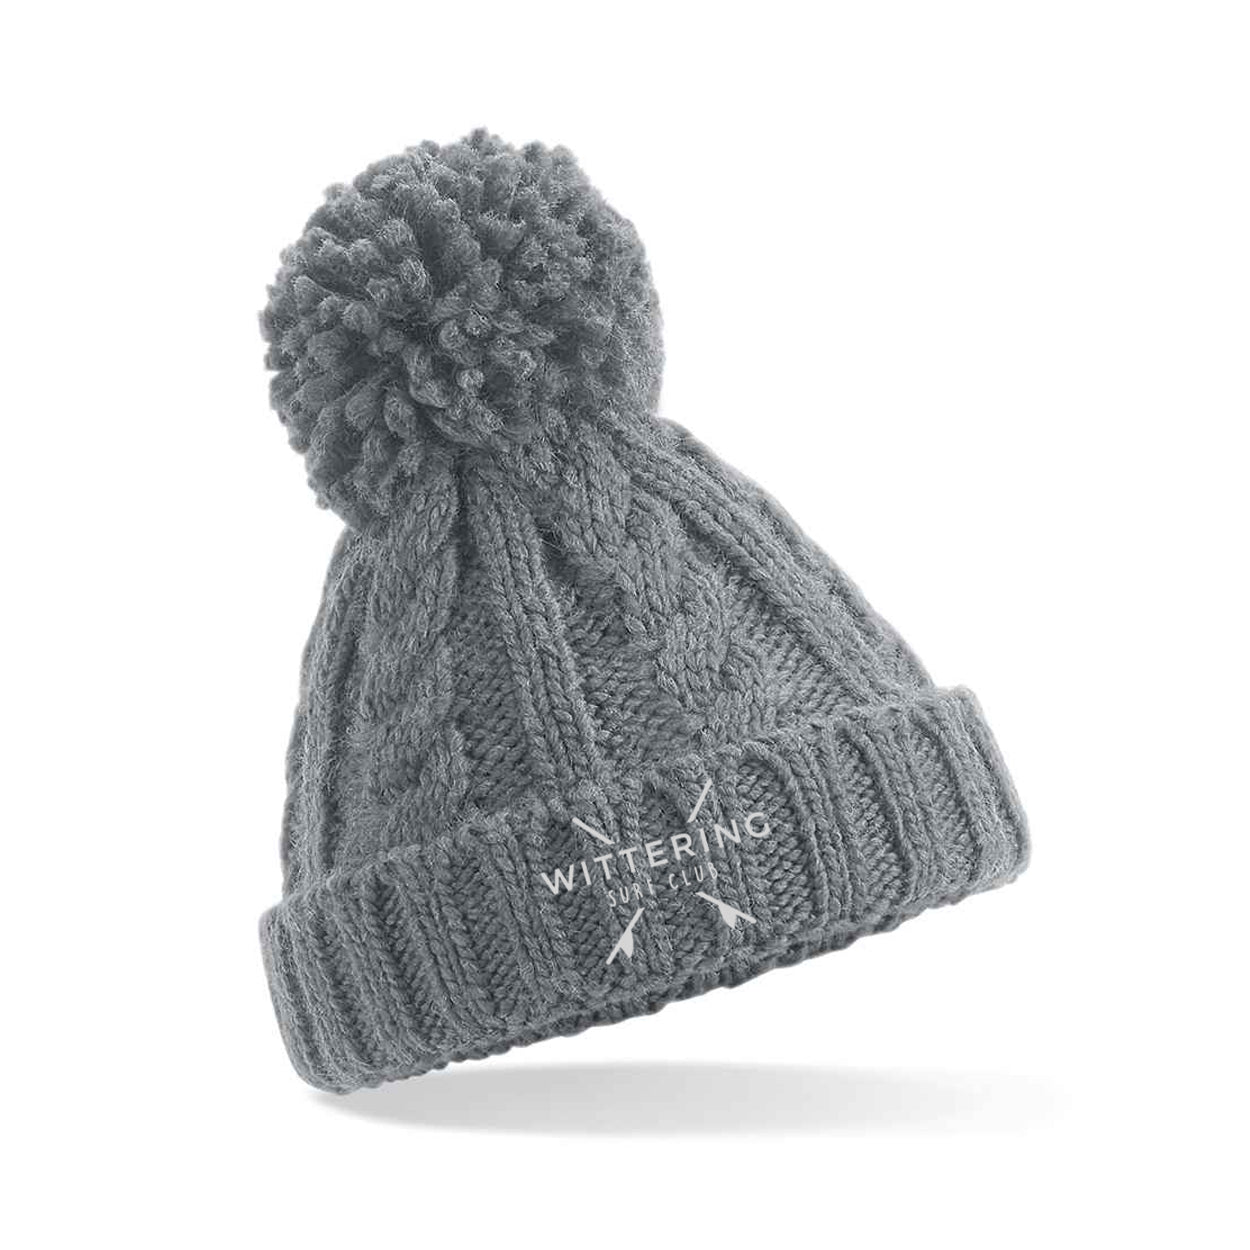 KIDS CHUNKY KNIT BEANIE - GREY - Wittering Surf Shop